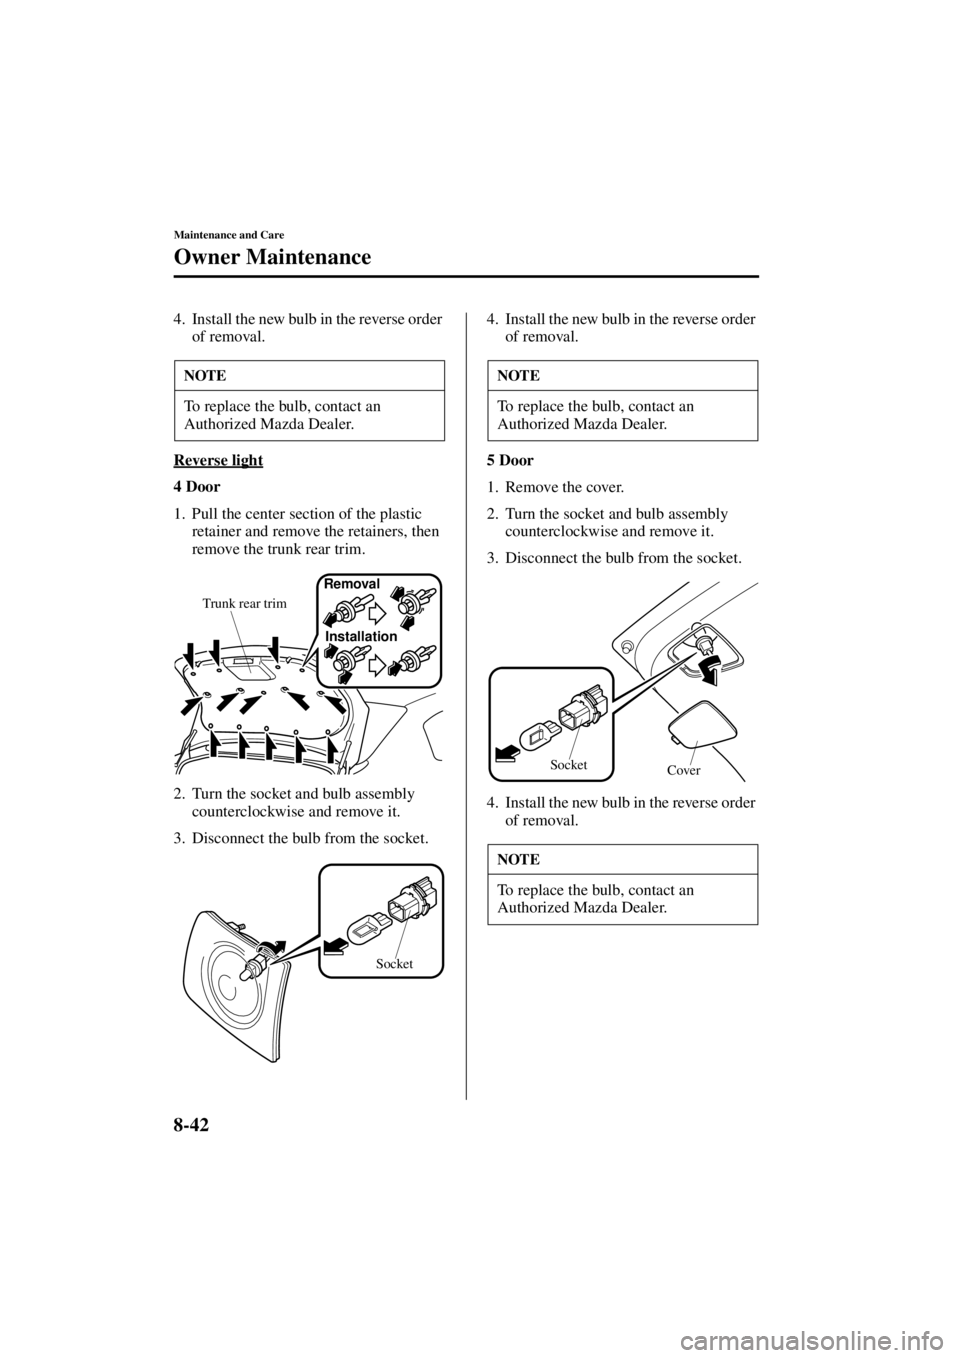 MAZDA MODEL 3 5-DOOR 2004  Owners Manual 8-42
Maintenance and Care
Owner Maintenance
Form No. 8S18-EA-03I
4. Install the new bulb in the reverse order of removal.
Reverse light
4 Door
1. Pull the center section of the plastic  retainer and r